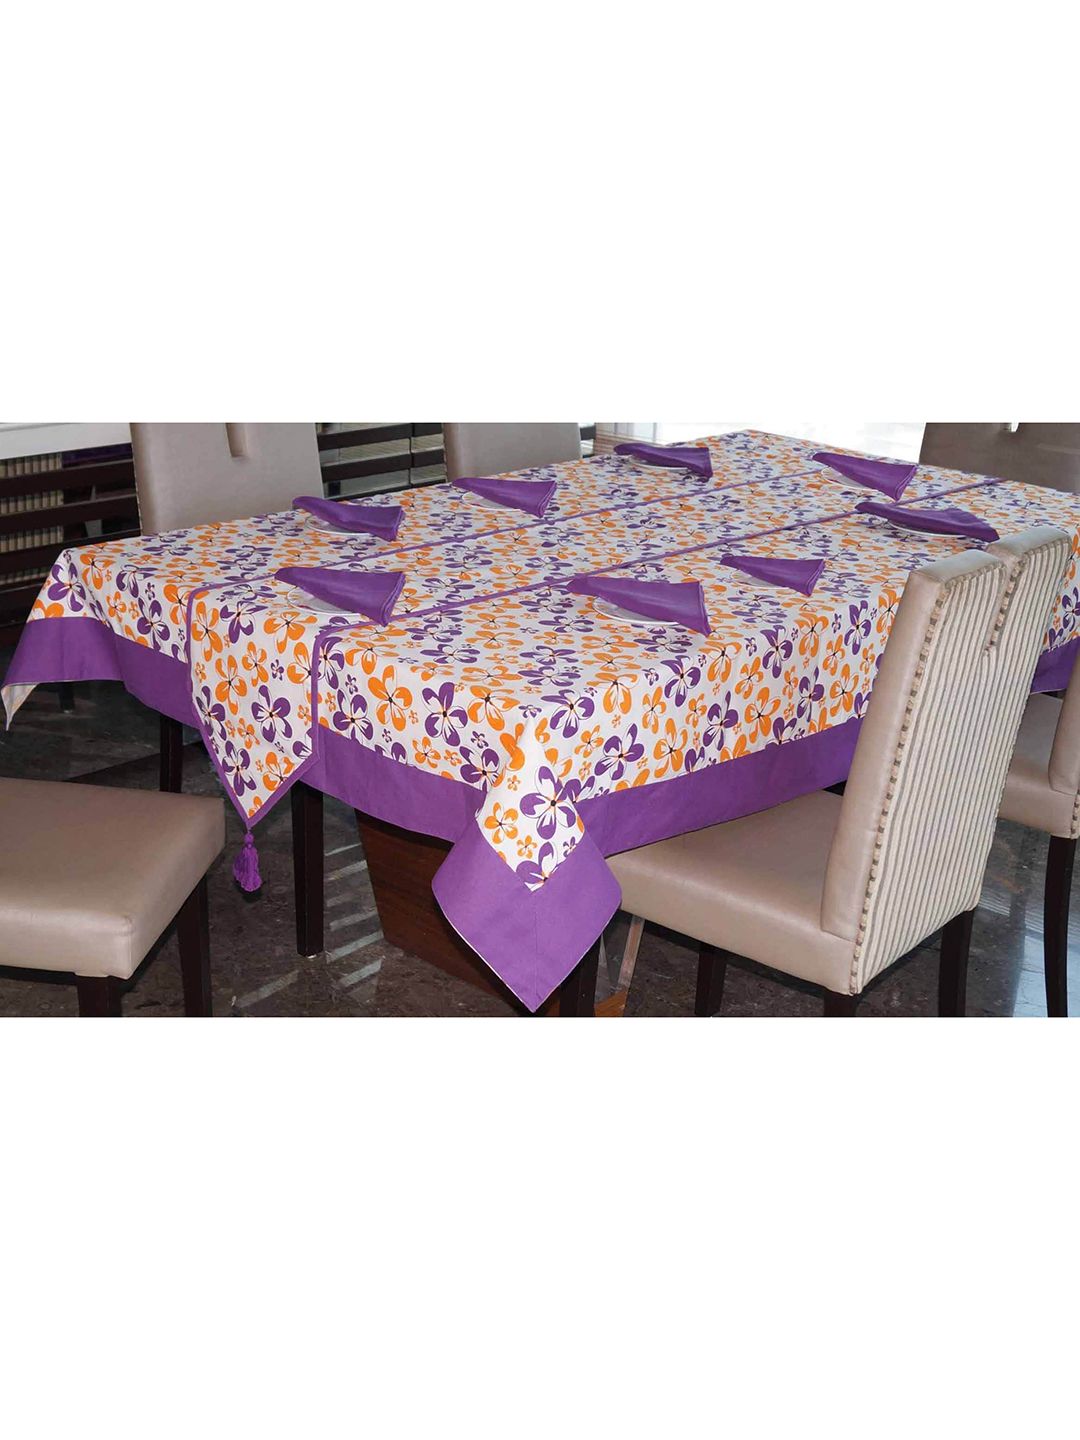 Lushomes Set Of 10 Purple & White Printed 8-Seater Cotton Table Linen Set Price in India